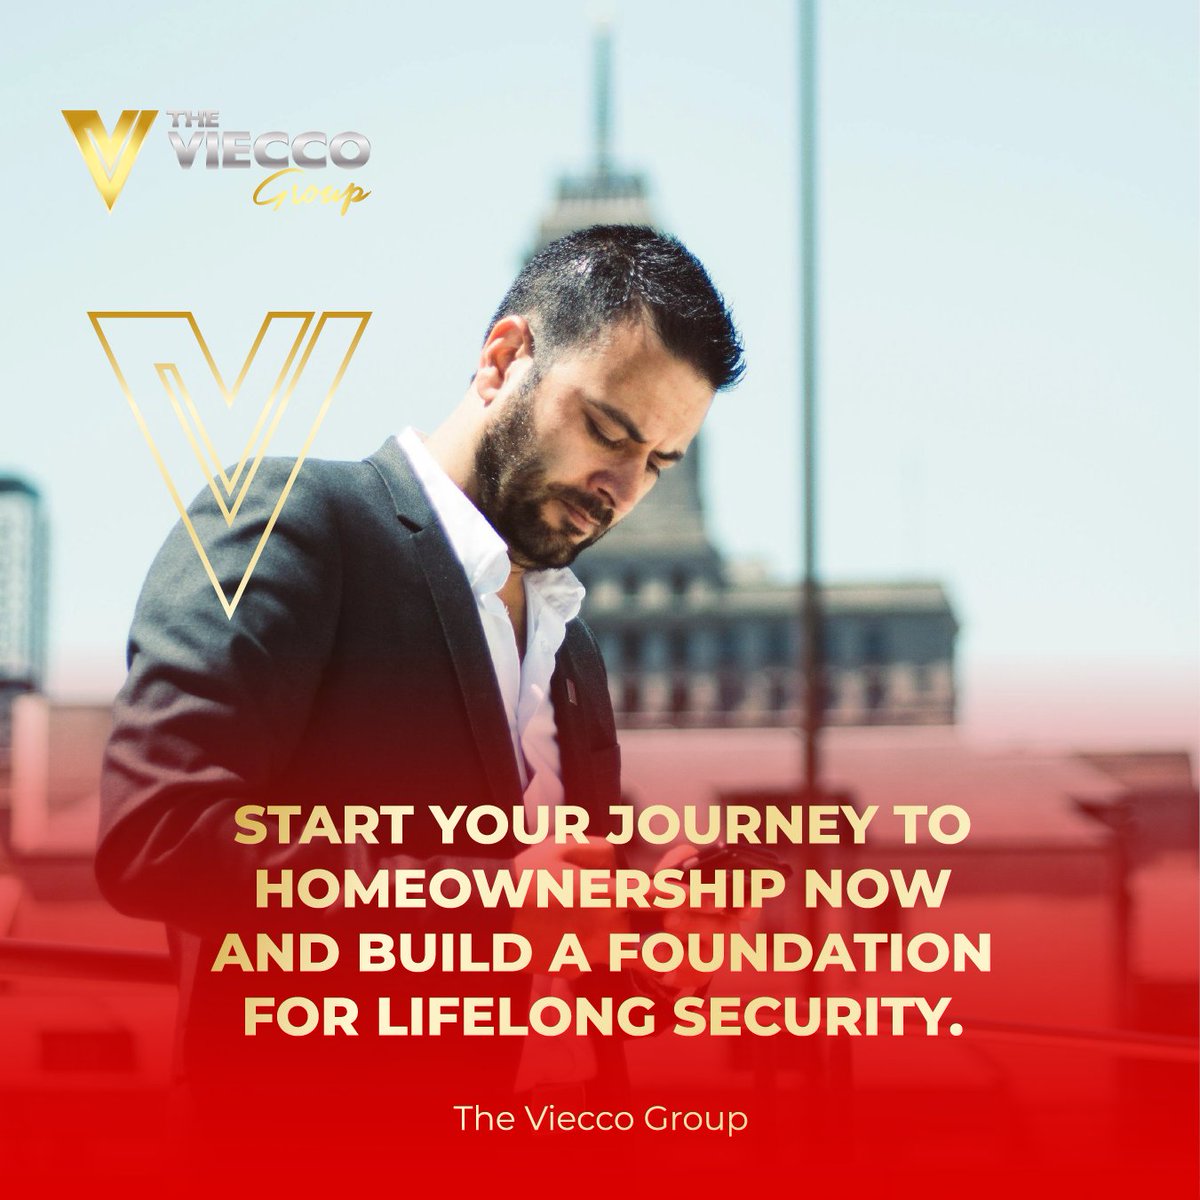 Let’s Connect And Grow Together!!!!!

#thevieccogroup #makingthingshappen #successstory #thenewbanking #construyendoriqueza #buildingwealth #entrepreneur #entrepreneurship #luxury #topproducer #mortgages #sales #business #investment #opportunities #properties #bank #banker